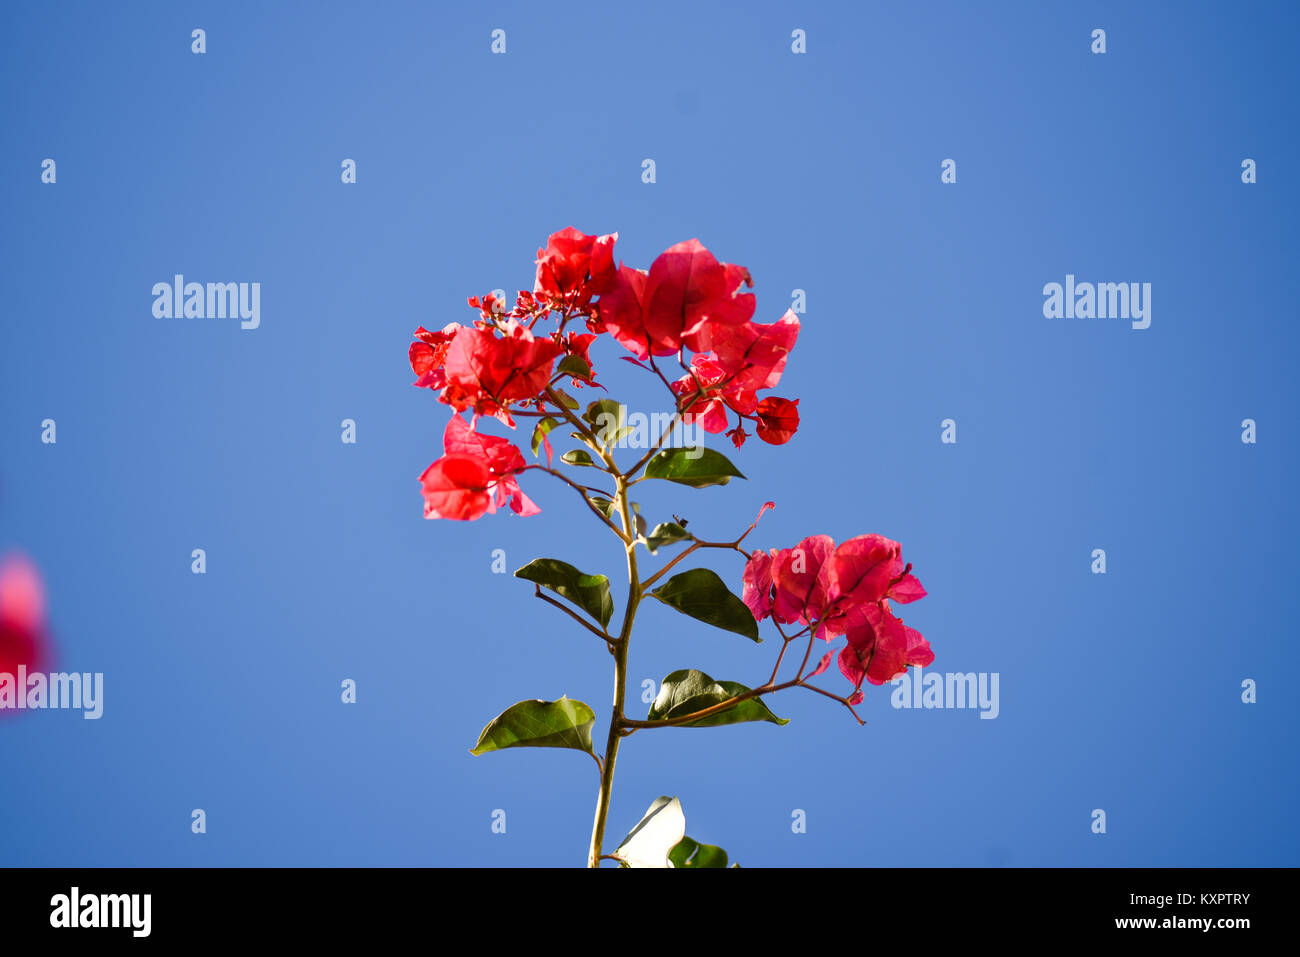 Blooming red bougainvillea flower, against the background of other flowers and blue sky, Lanzarote Canary Islands. Stock Photo